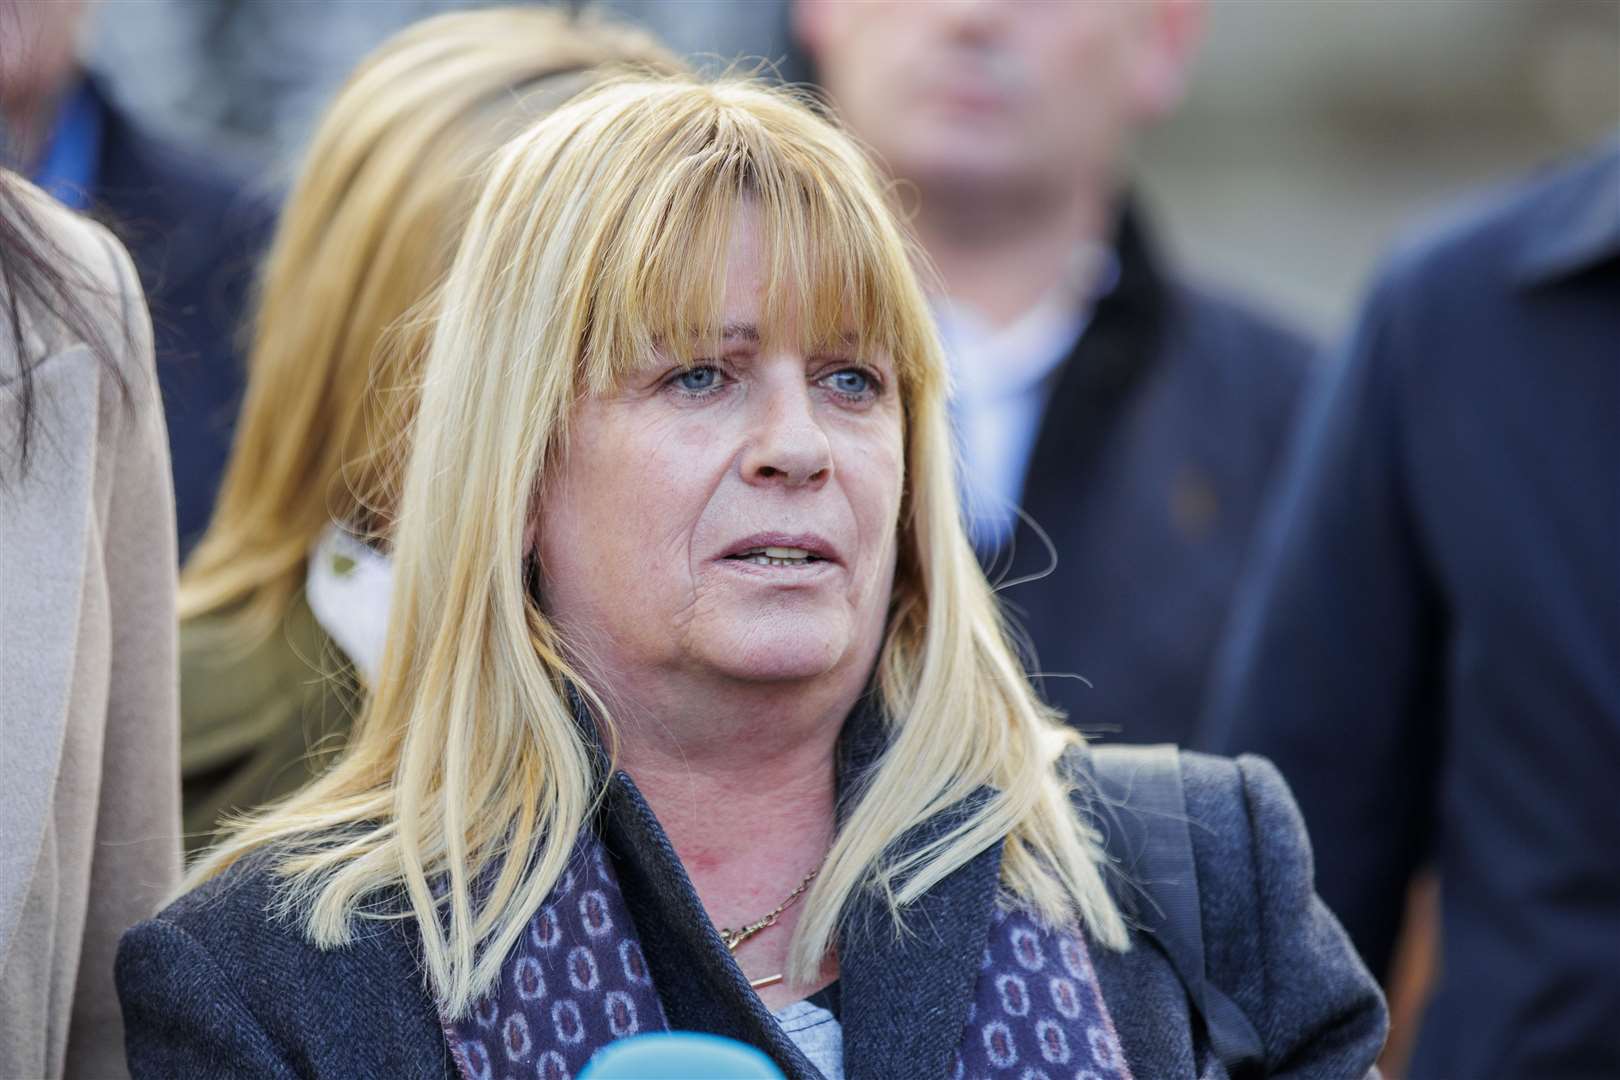 Troubles victim Martina Dillon was one of the applicants in the case (Liam McBurney/PA)